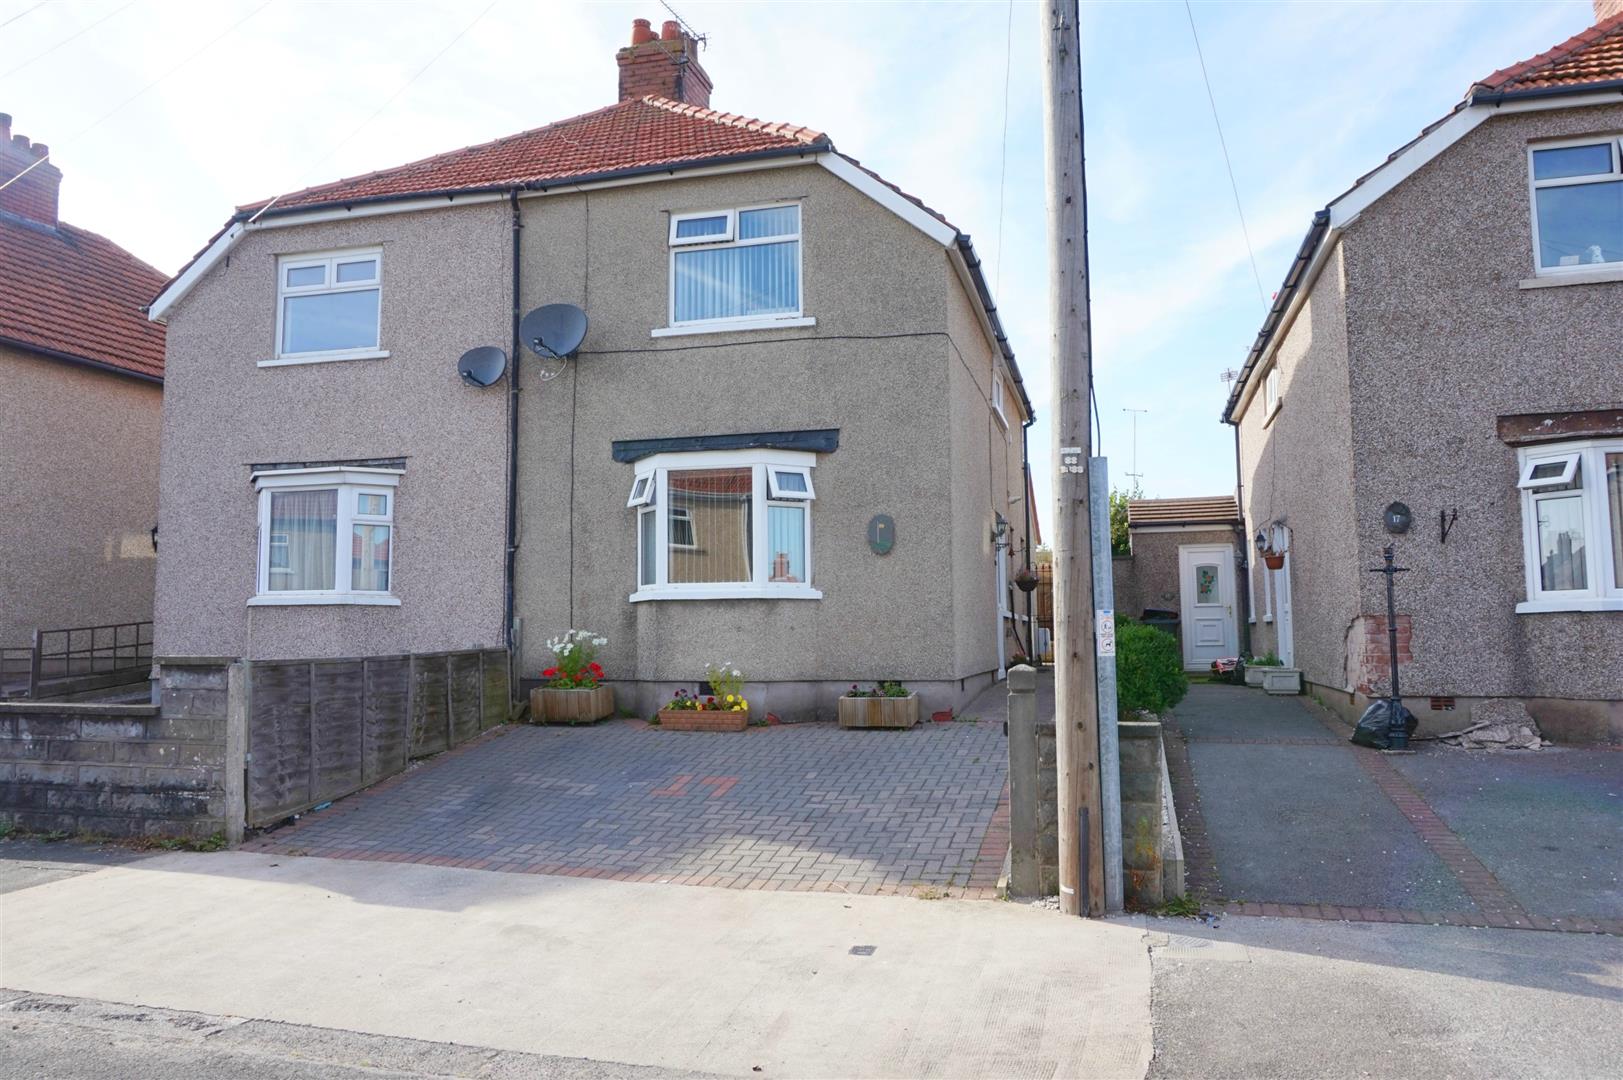 Family rentals - This great Morecambe property could get you a gross 6% Yield